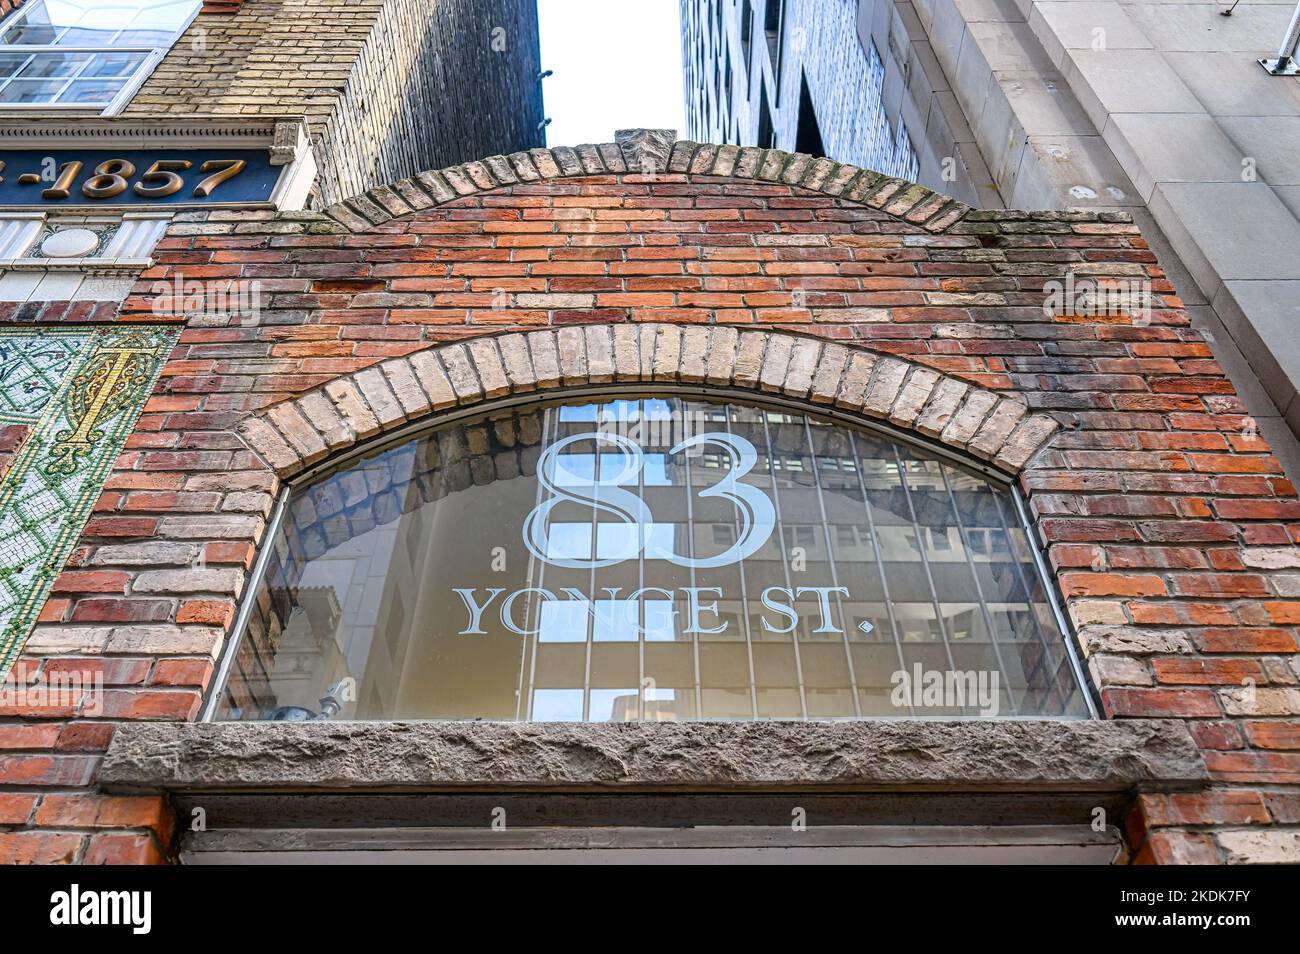 The Tin & Copper Smith Building. Heritage building at 83 Yonge Street.  Toronto, Canada Stock Photo